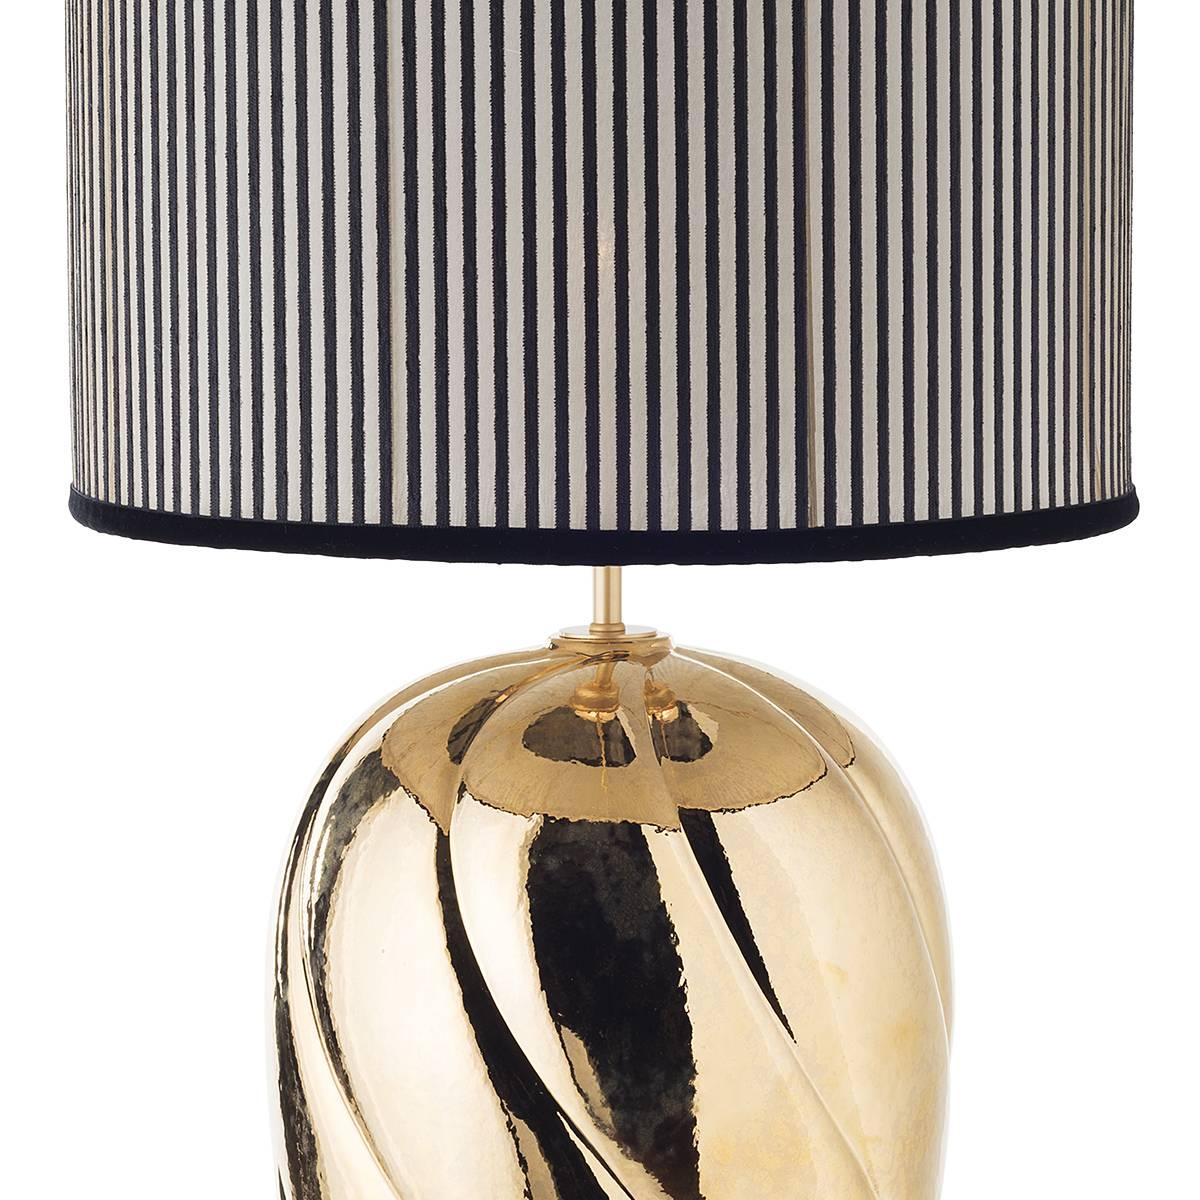 Pair of large ceramic table lamps and shades.
The sinuous-ribbed body made of ceramic is gilded with antique gold hand-painted on dripped glazed surface. The lamp is complemented by a cylindrical shade in a transparent texture enriched by dark